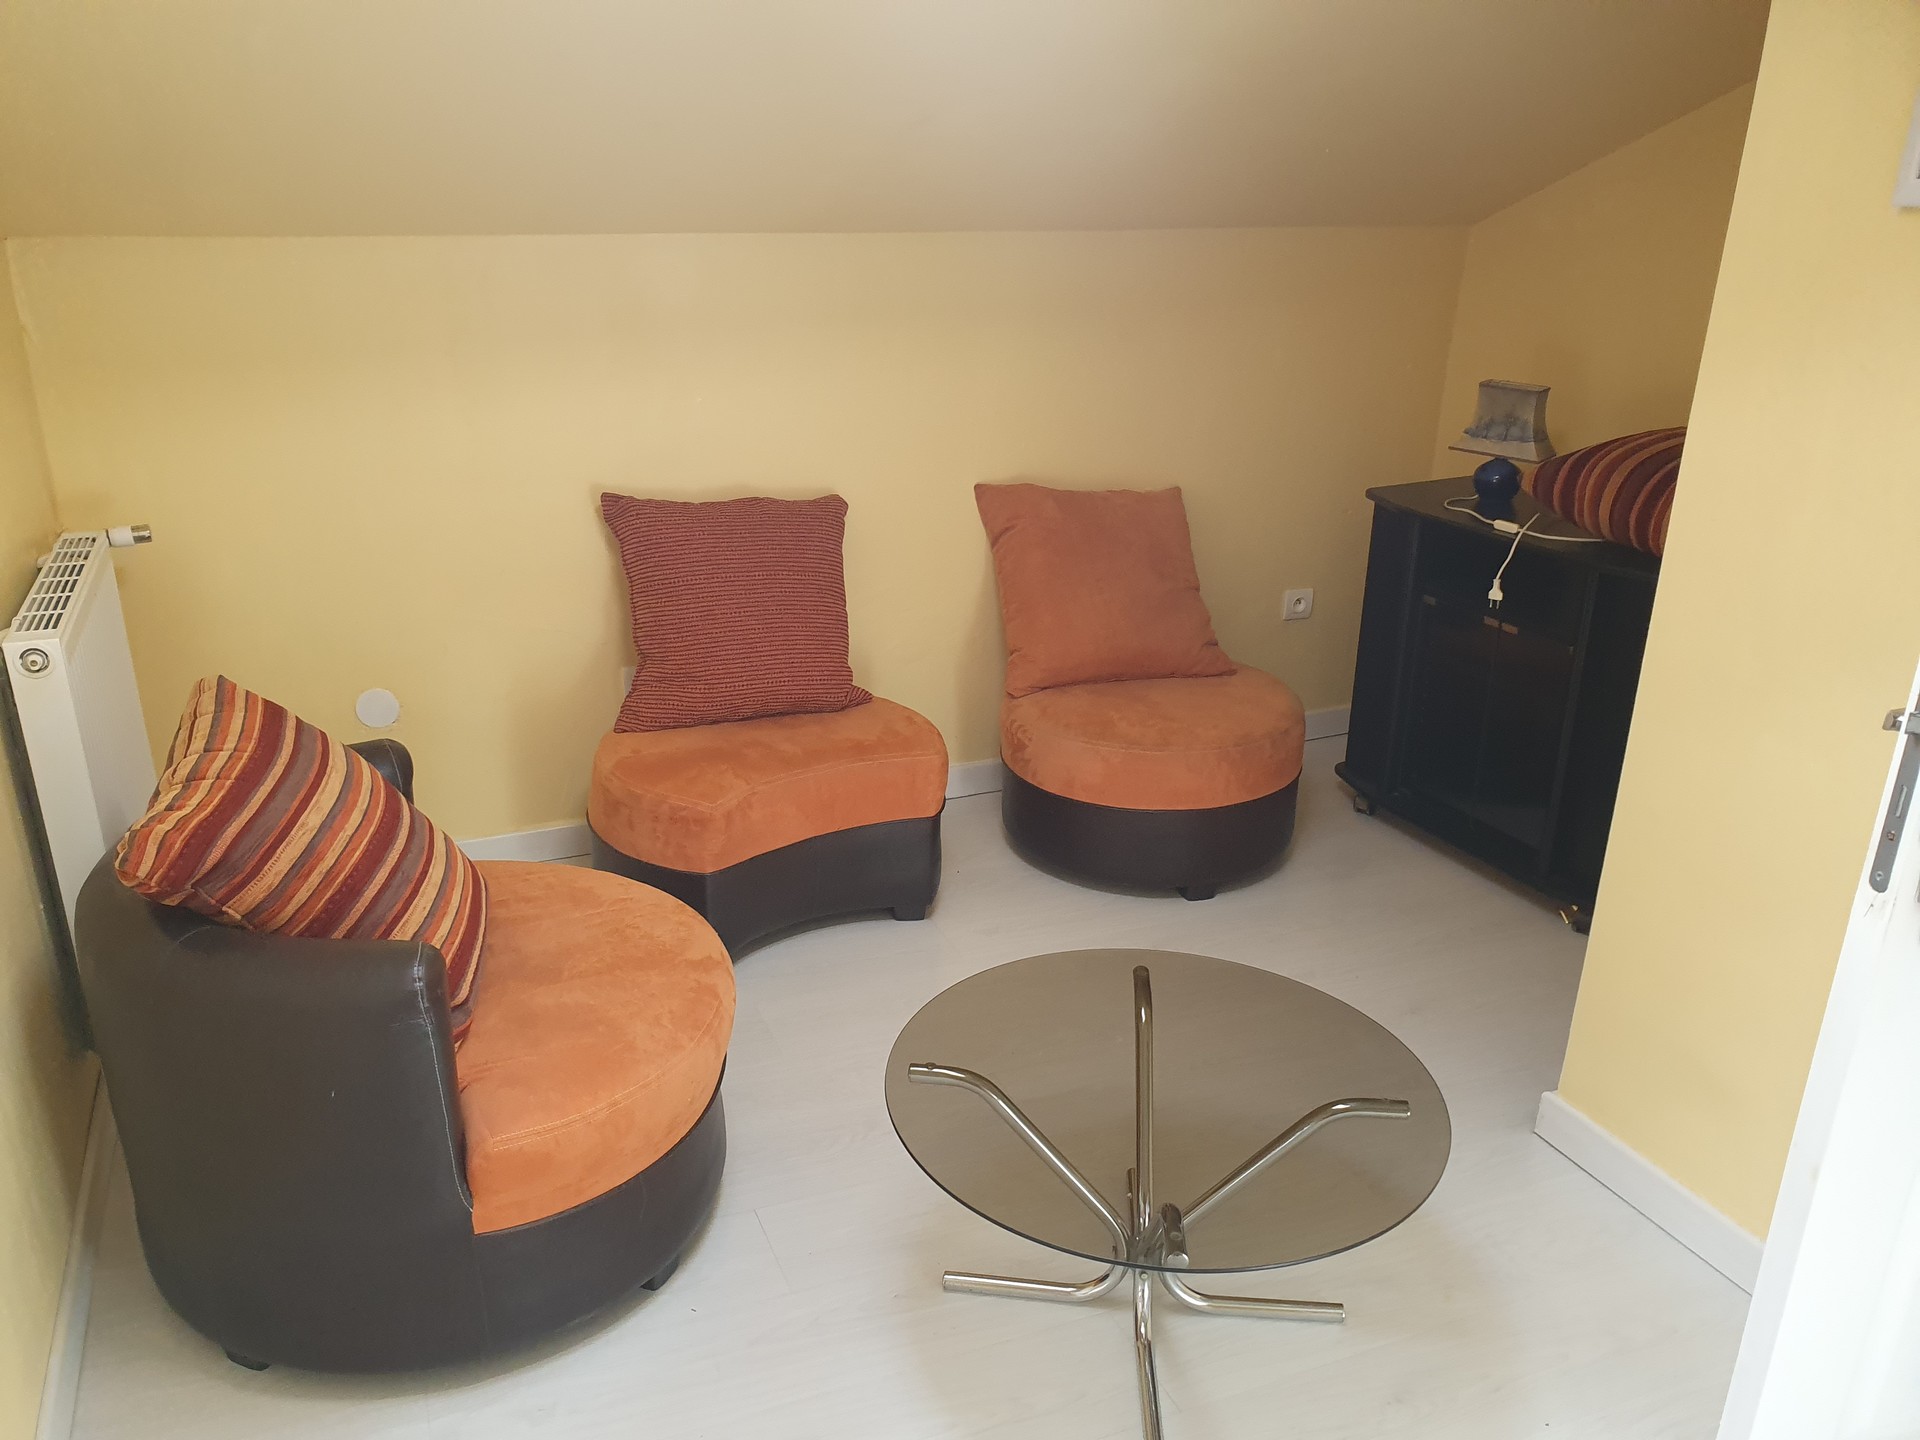 Room For Rent In 4 Bedroom House In Clermont Ferrand With Storage Area